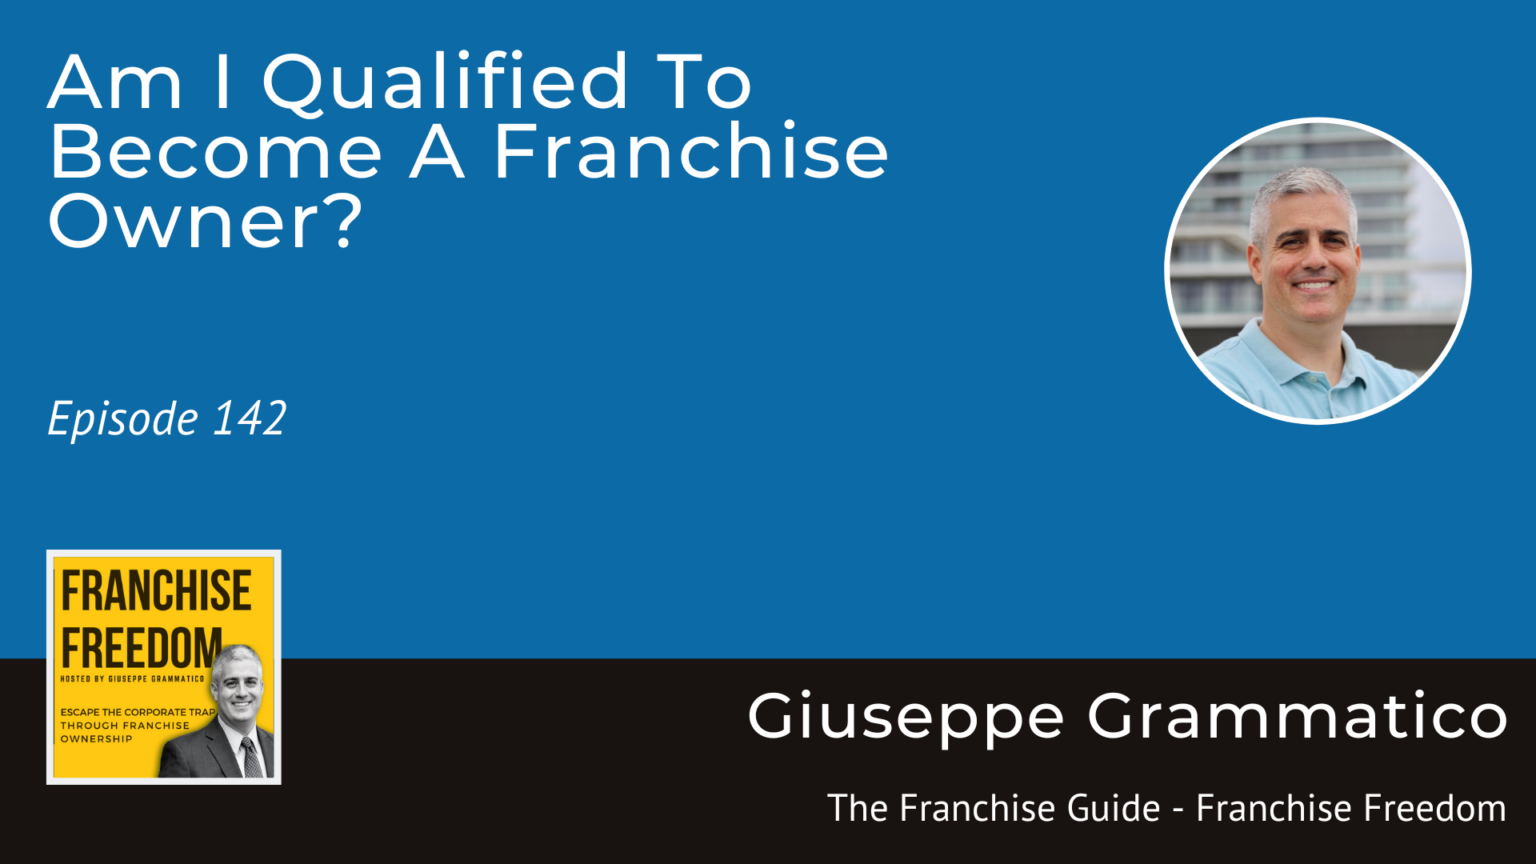 Am I Qualified To Become A Franchise Owner?